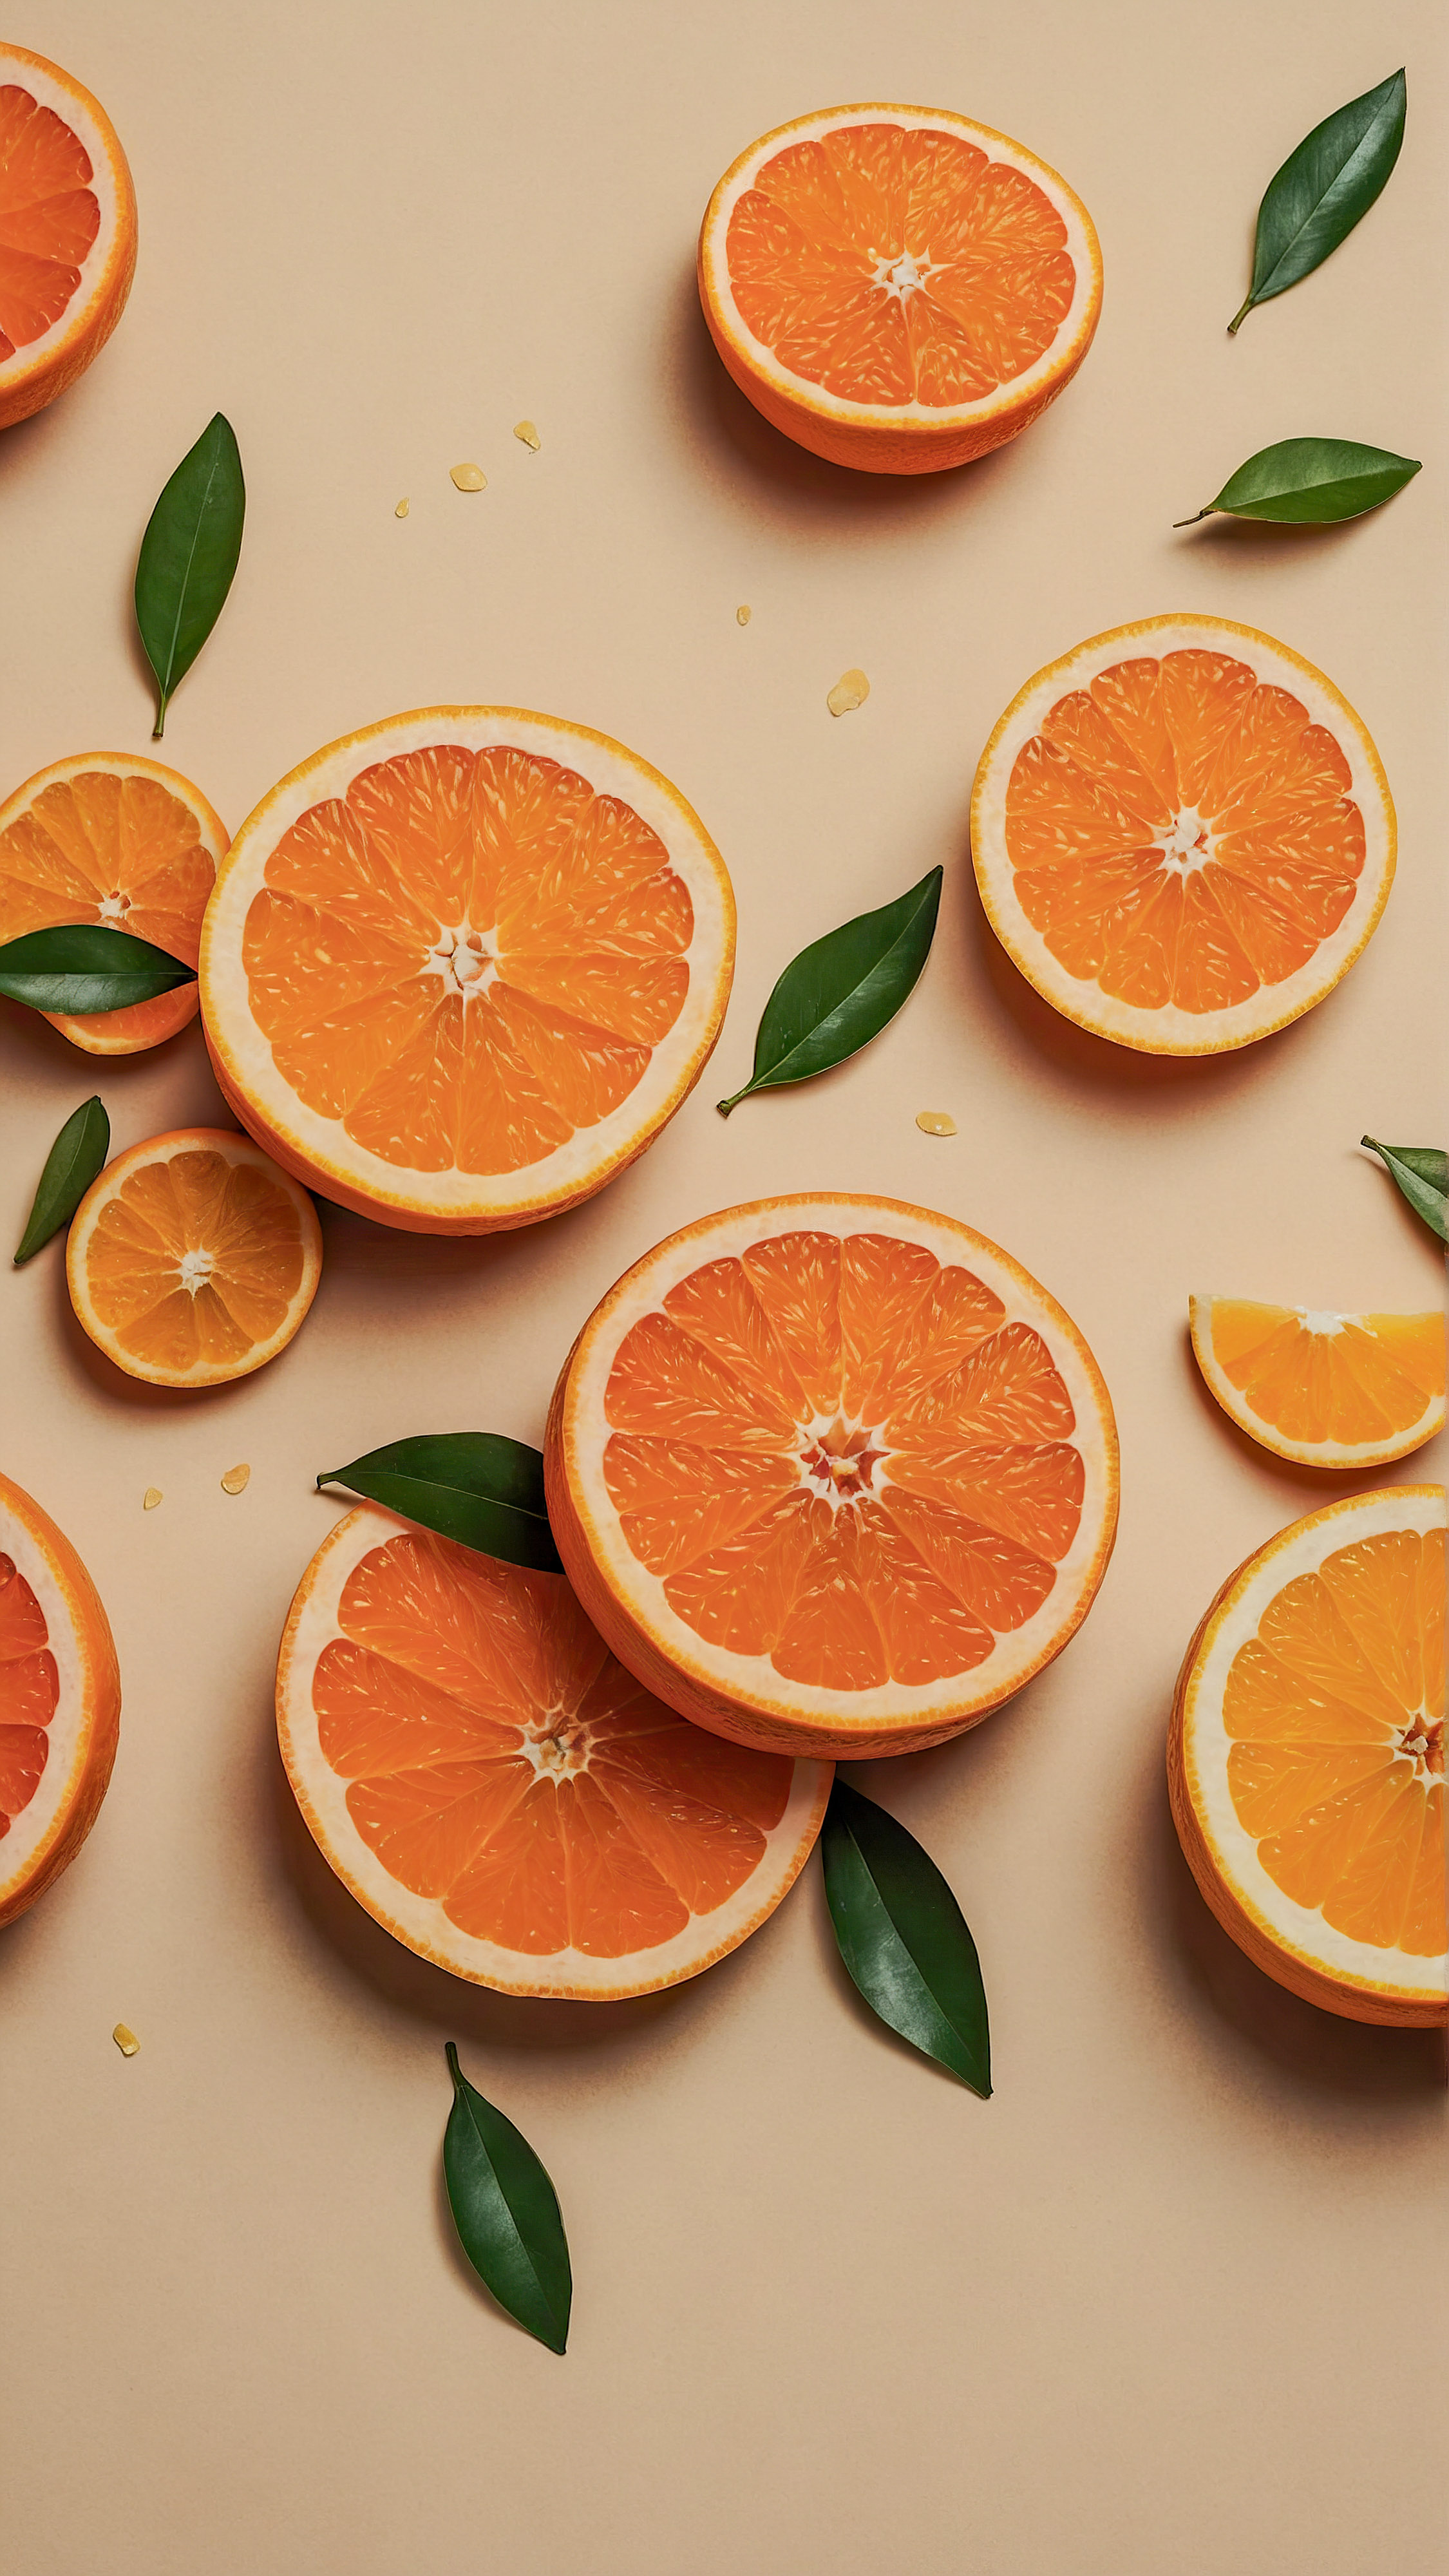 Transform your device’s look with a cool aesthetic iPhone wallpaper, showcasing a patterned design featuring various illustrations of whole and sliced oranges on a textured, light beige background.